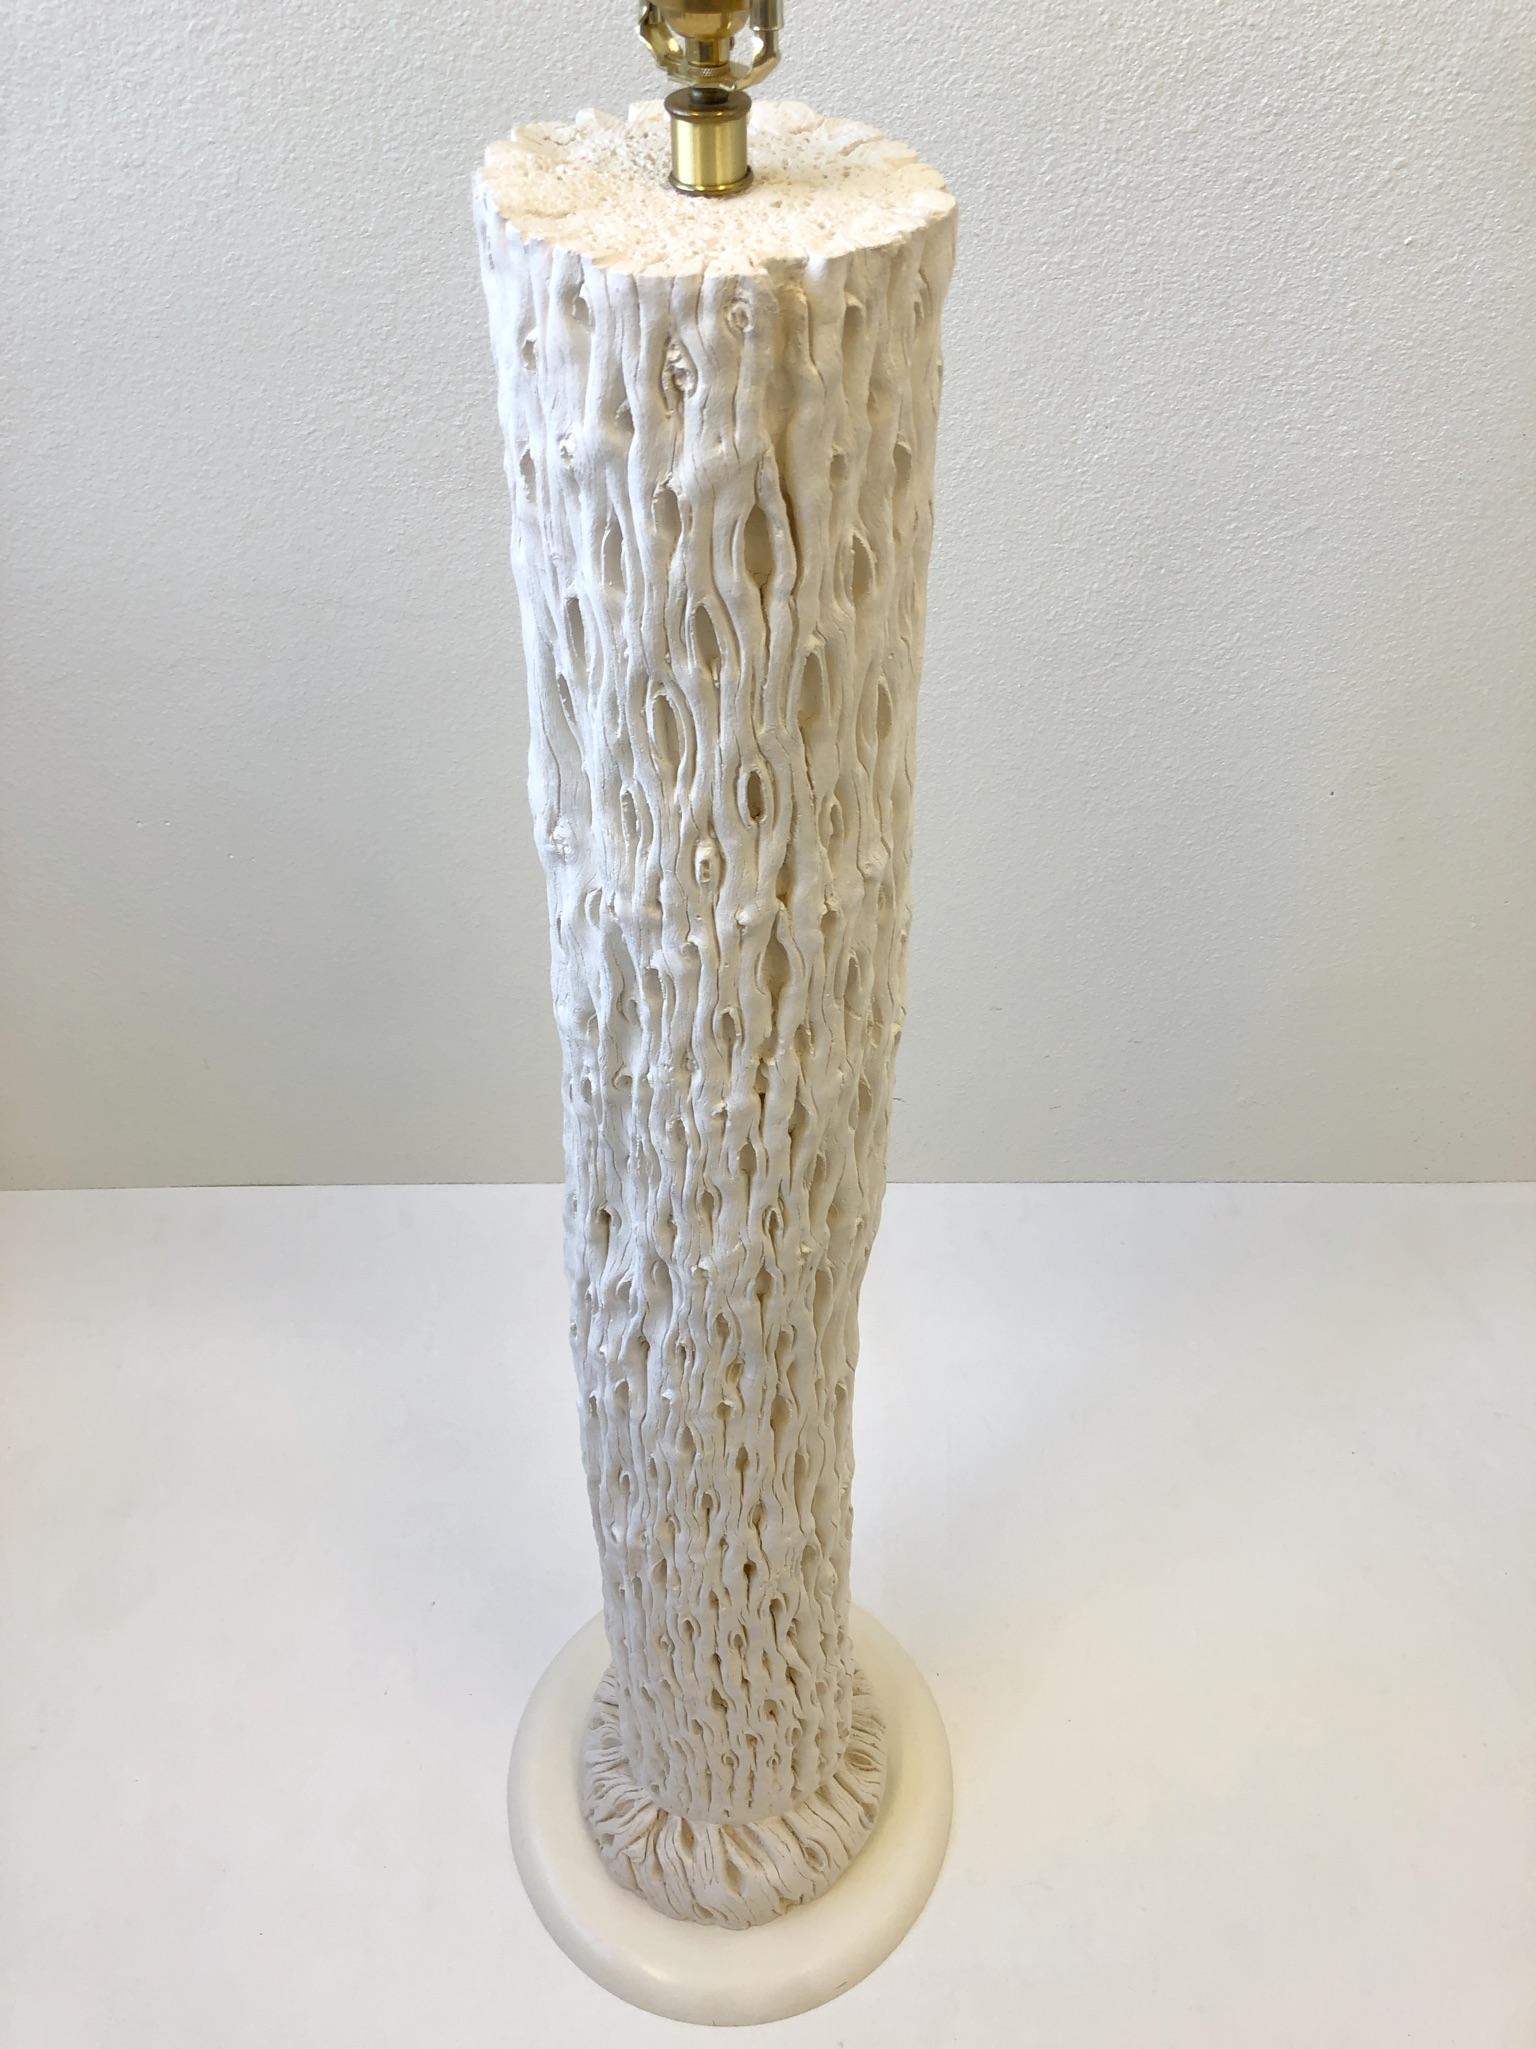 A spectacular cast plaster and polish brass Saguaro floor lamp from the 1980s. The lamp is newly rewired and new vanilla linen shade.
Measures: Dimensions 65.75” high 24” diameter.
Base is 15.5” diameter.